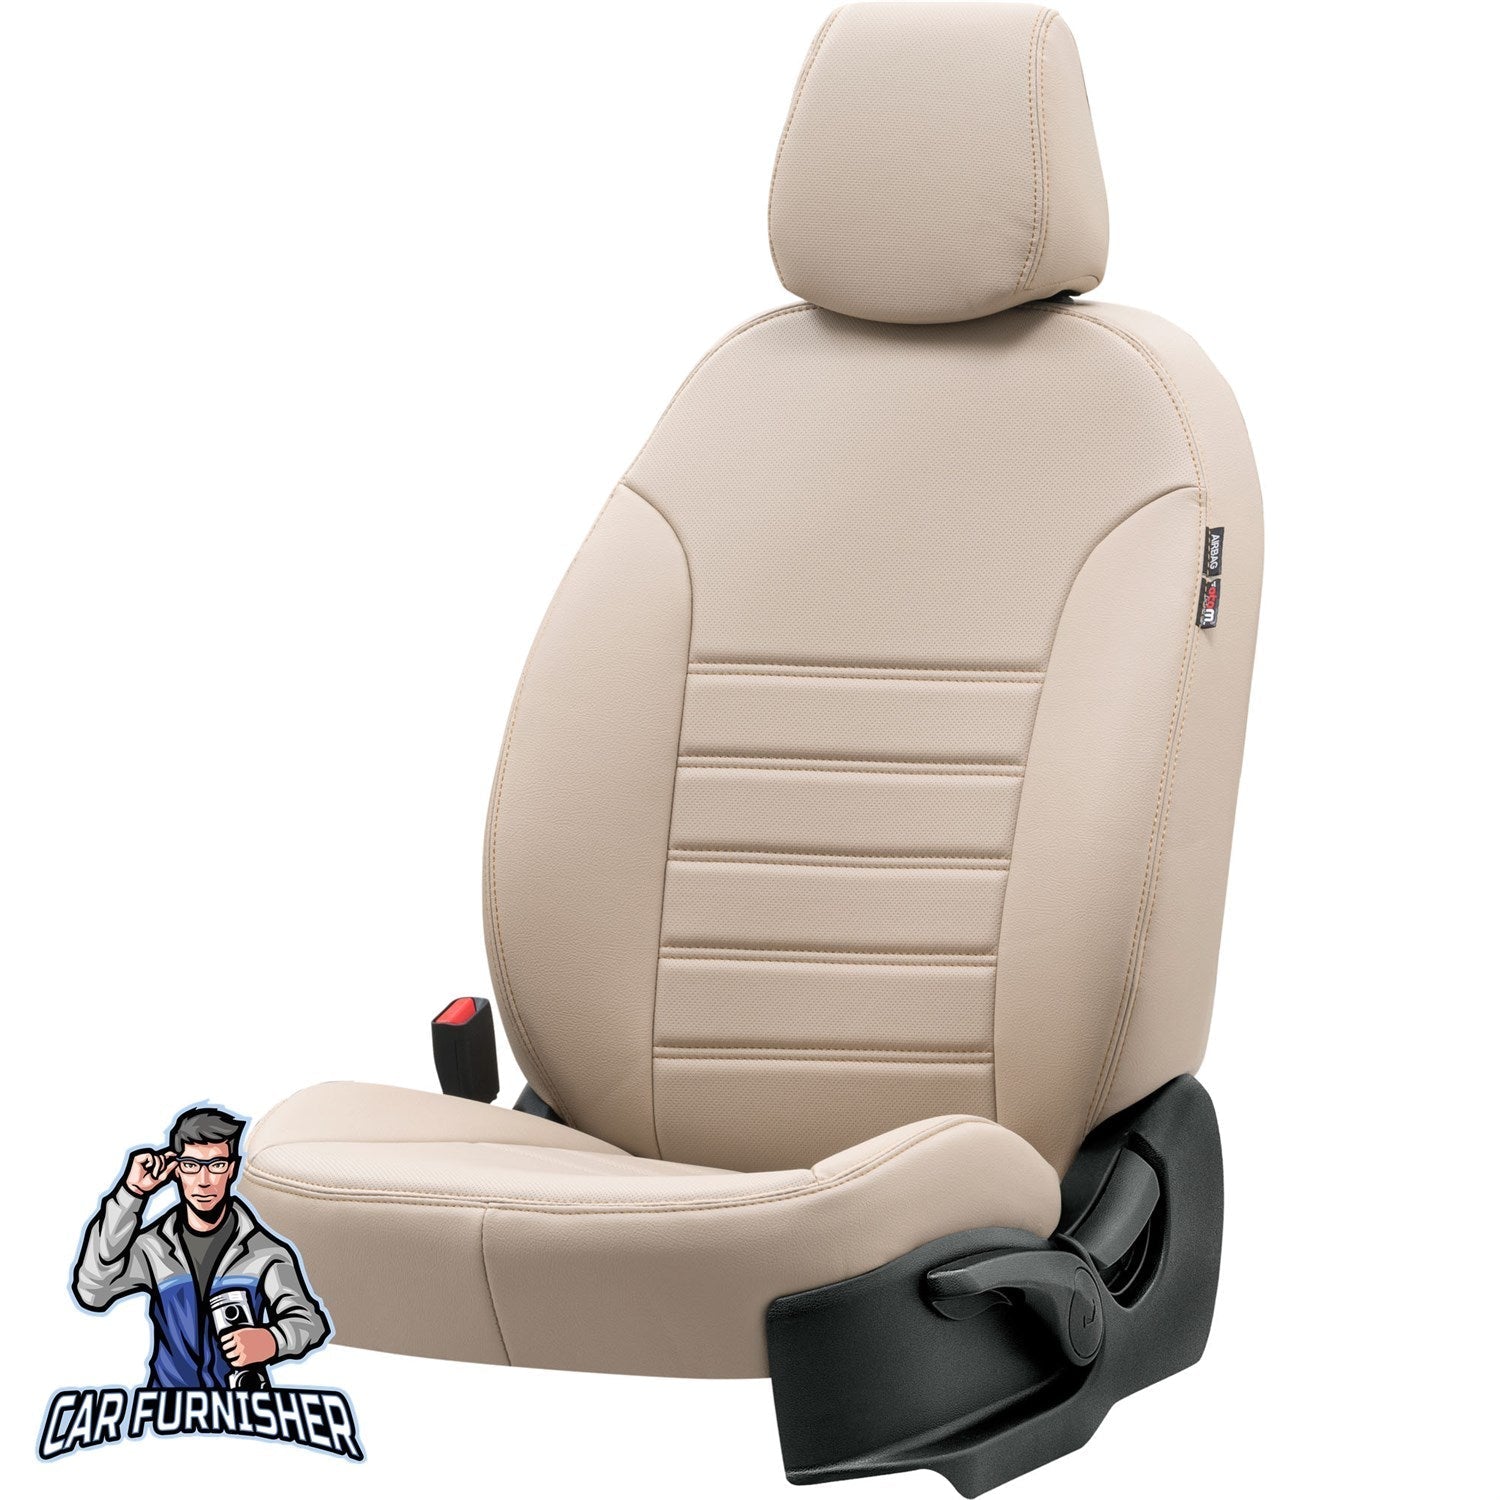 Citroen Jumpy Seat Covers Istanbul Leather Design Beige Leather